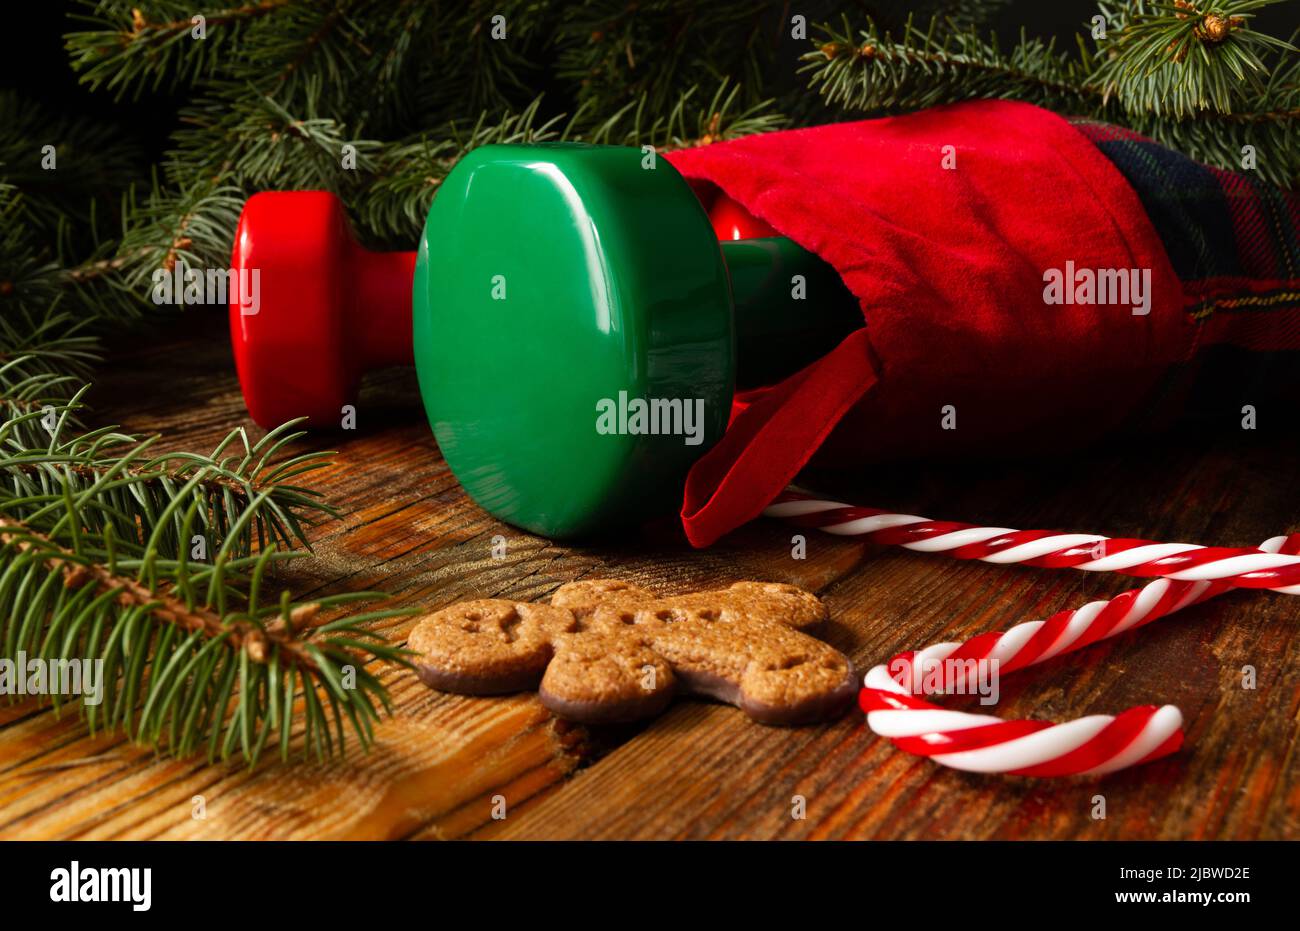 Dumbbells in stocking. Exercise equipment as Christmas gift idea. Gym fitness holiday composition, with gingerbread man cookie, candy cane, tree. Stock Photo